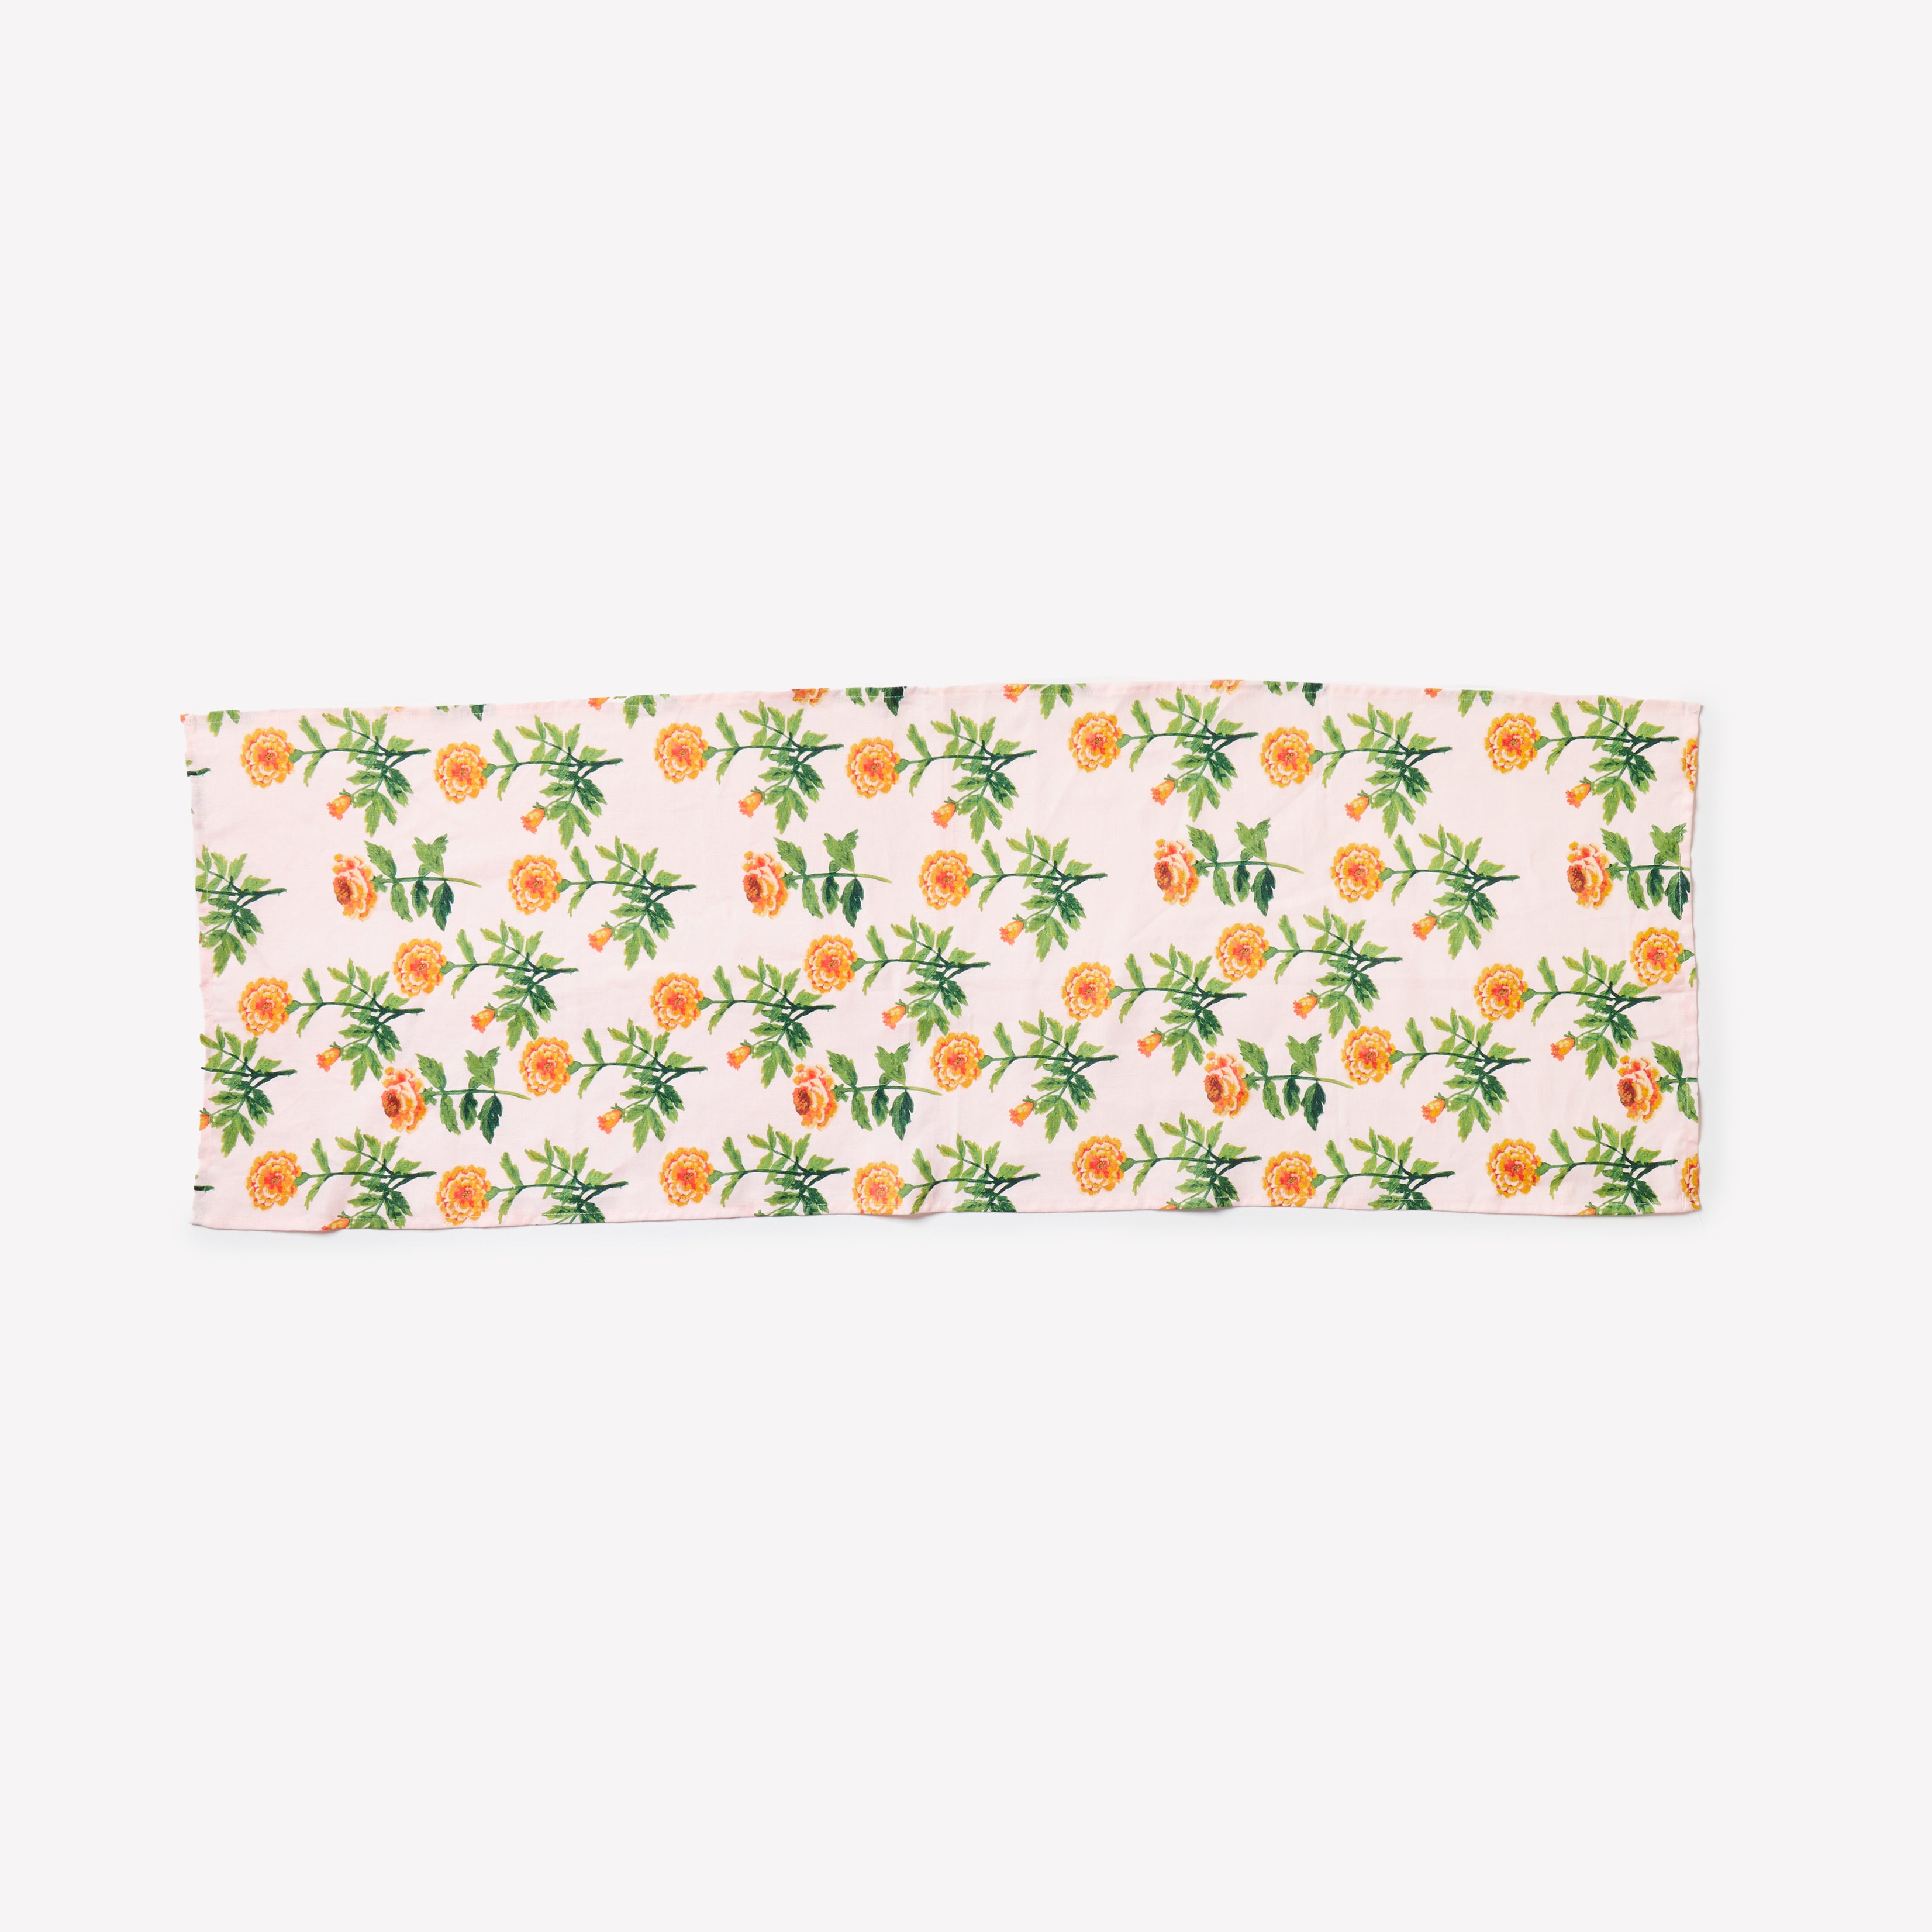 Petitie Lani Floral Pink Table Runner